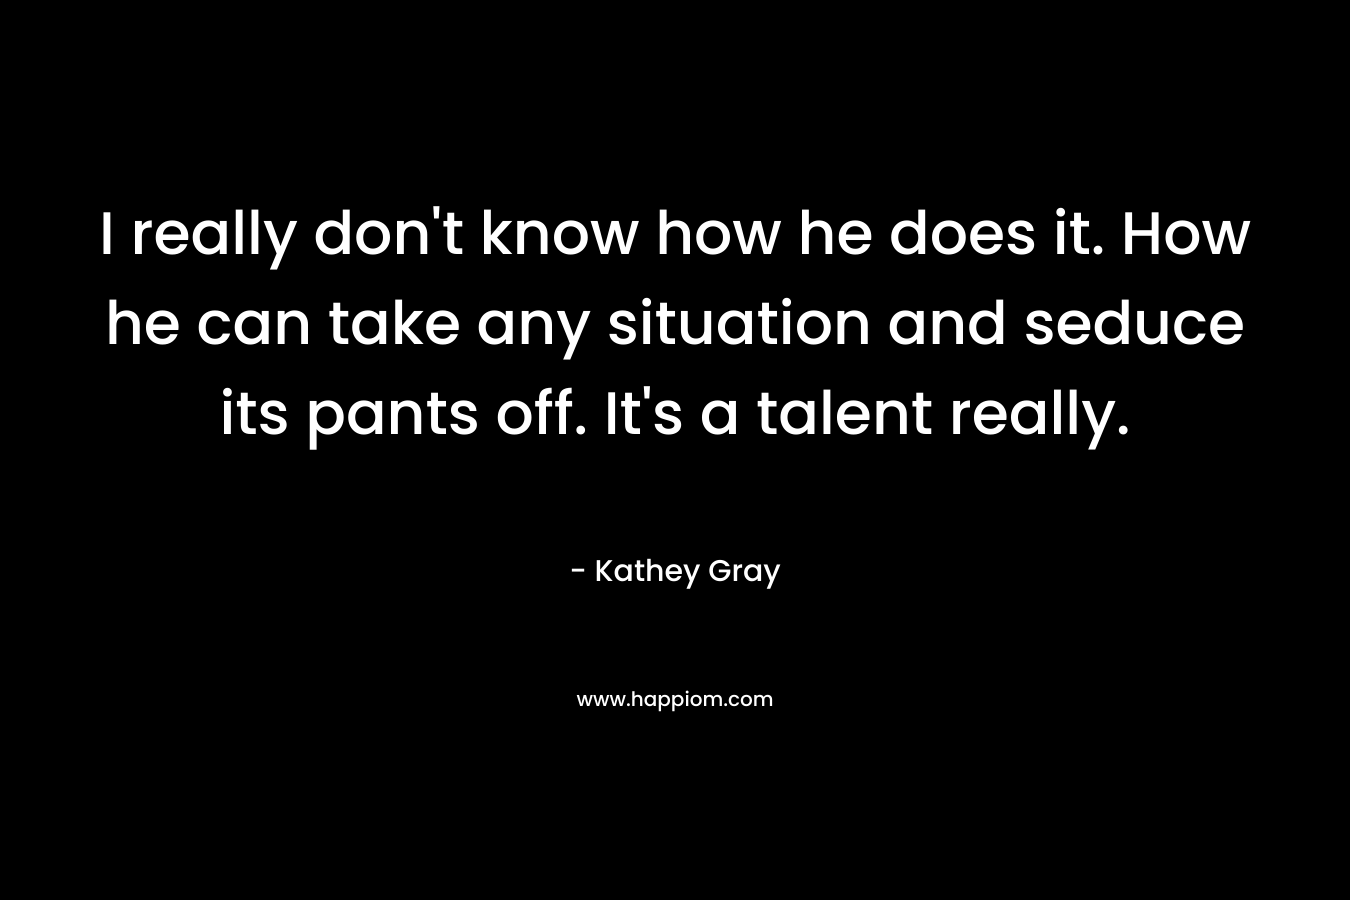 I really don’t know how he does it. How he can take any situation and seduce its pants off. It’s a talent really. – Kathey Gray